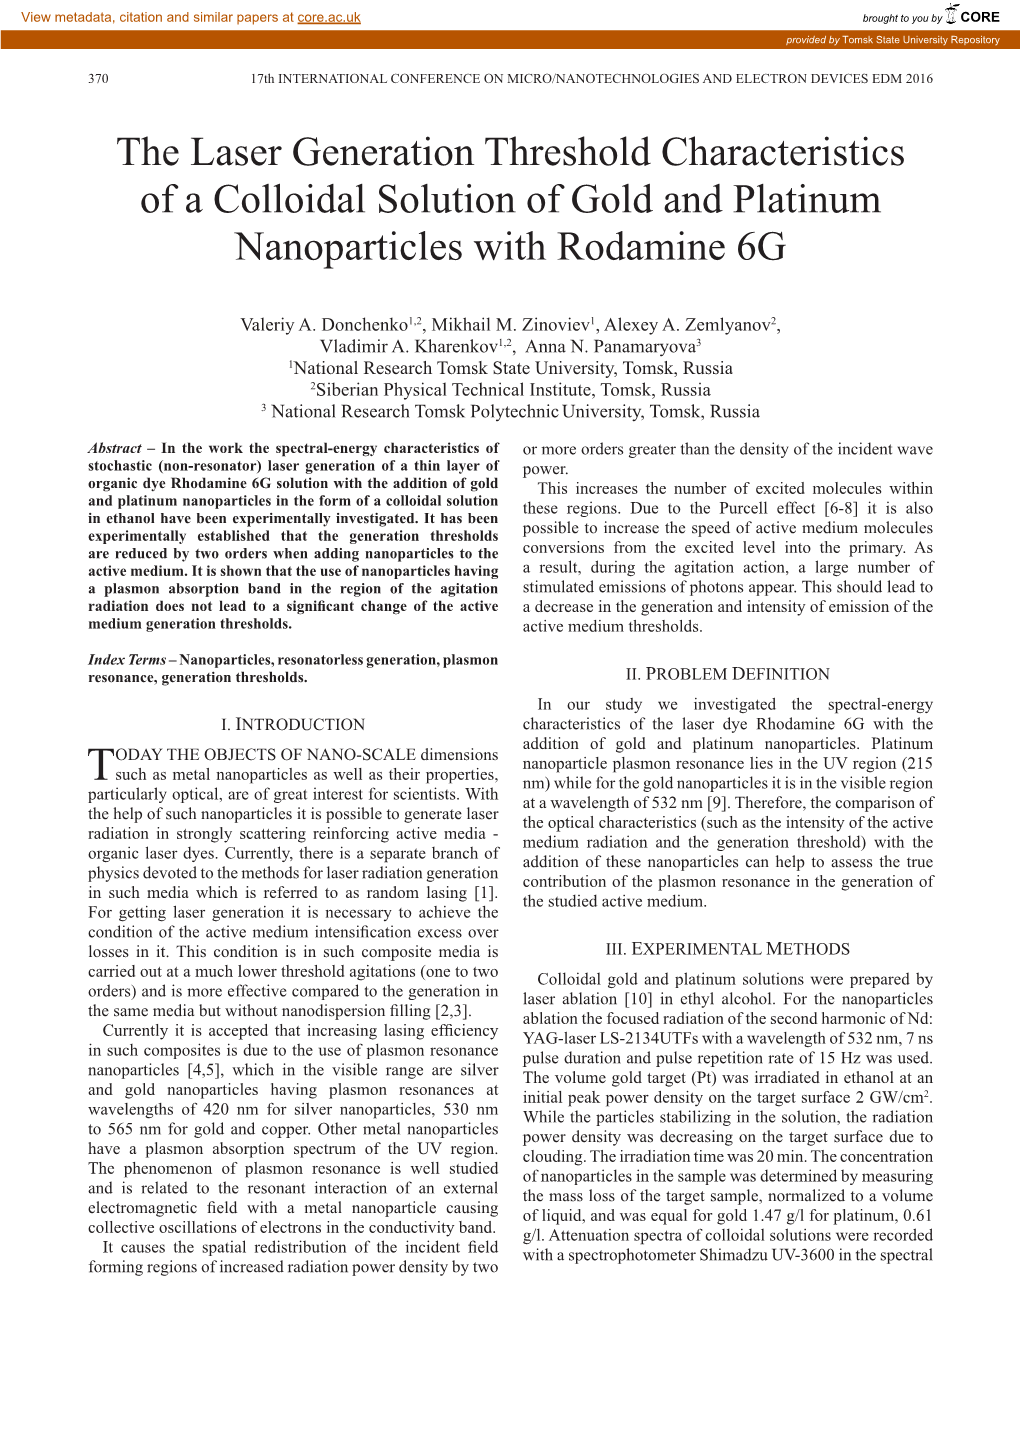 The Laser Generation Threshold Characteristics of a Colloidal Solution of Gold and Platinum Nanoparticles with Rodamine 6G